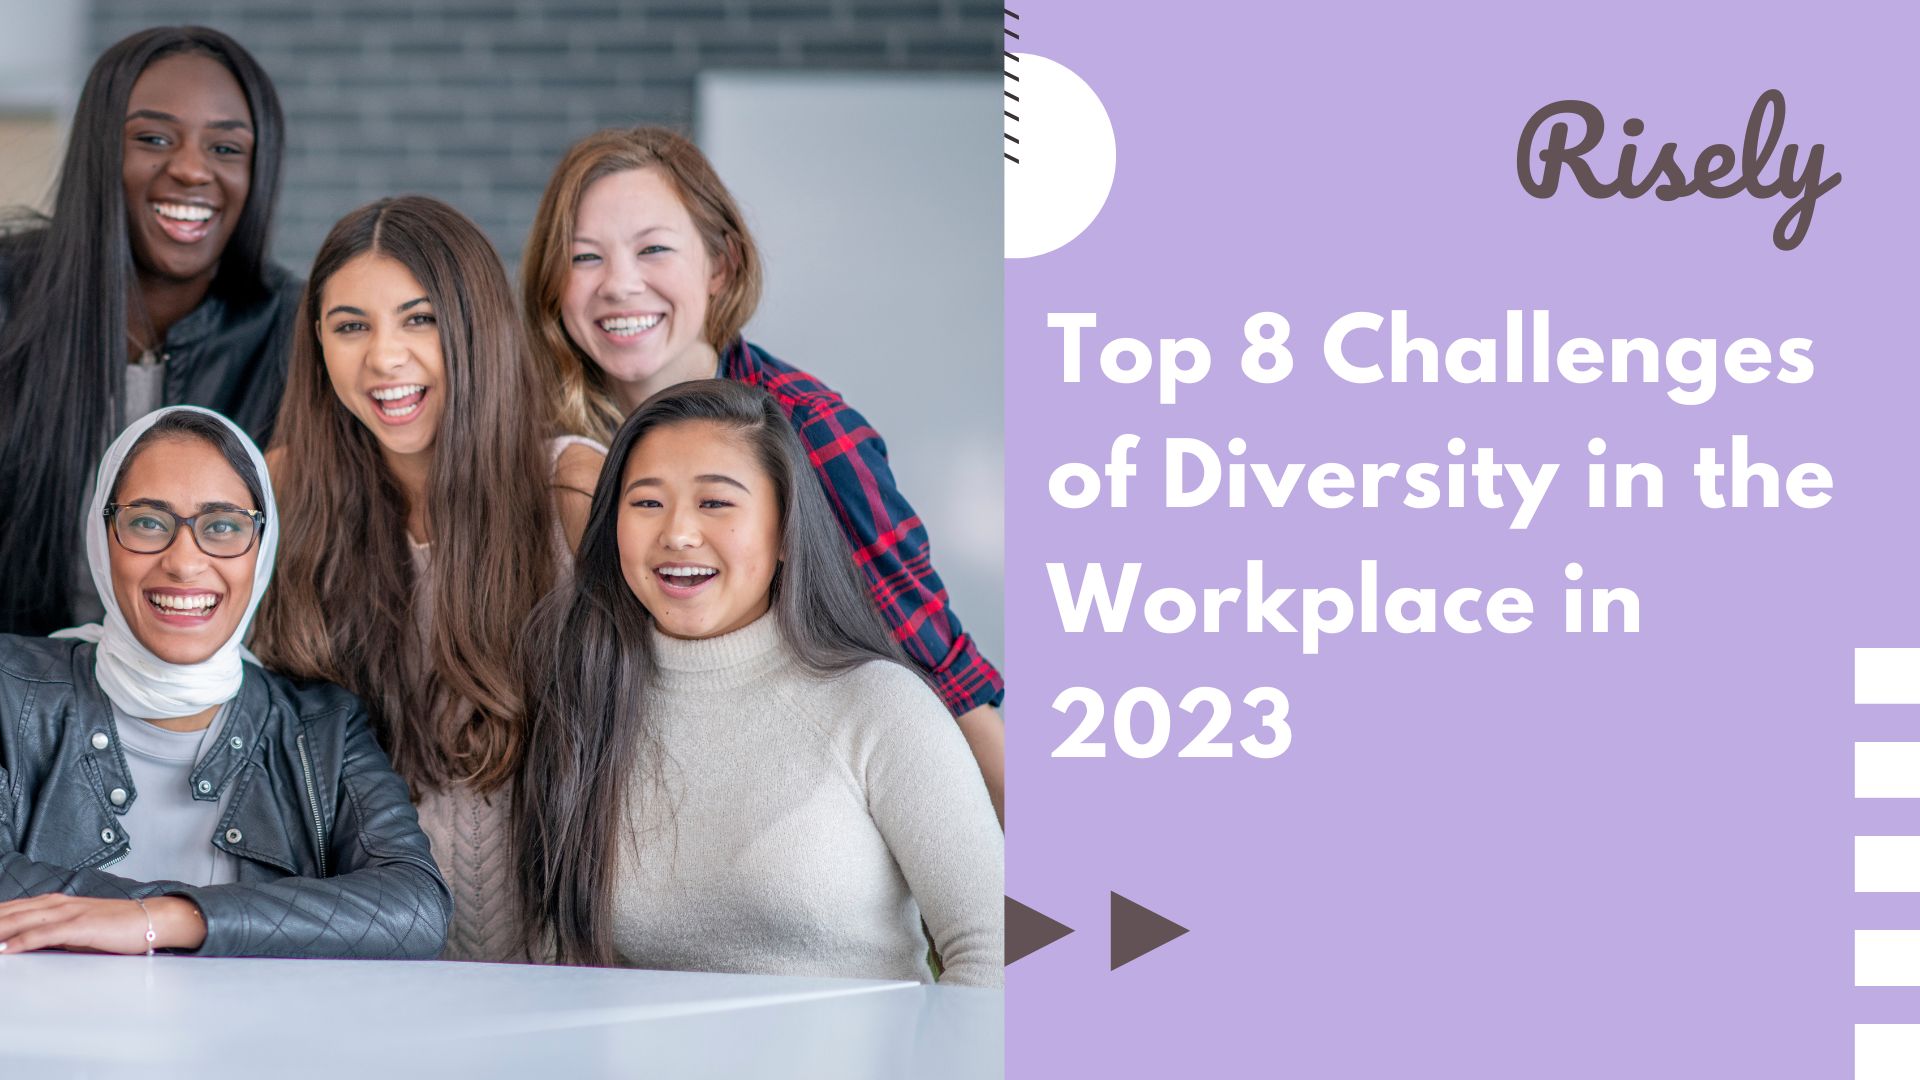 Top 8 Challenges of Diversity in the Workplace in 2023